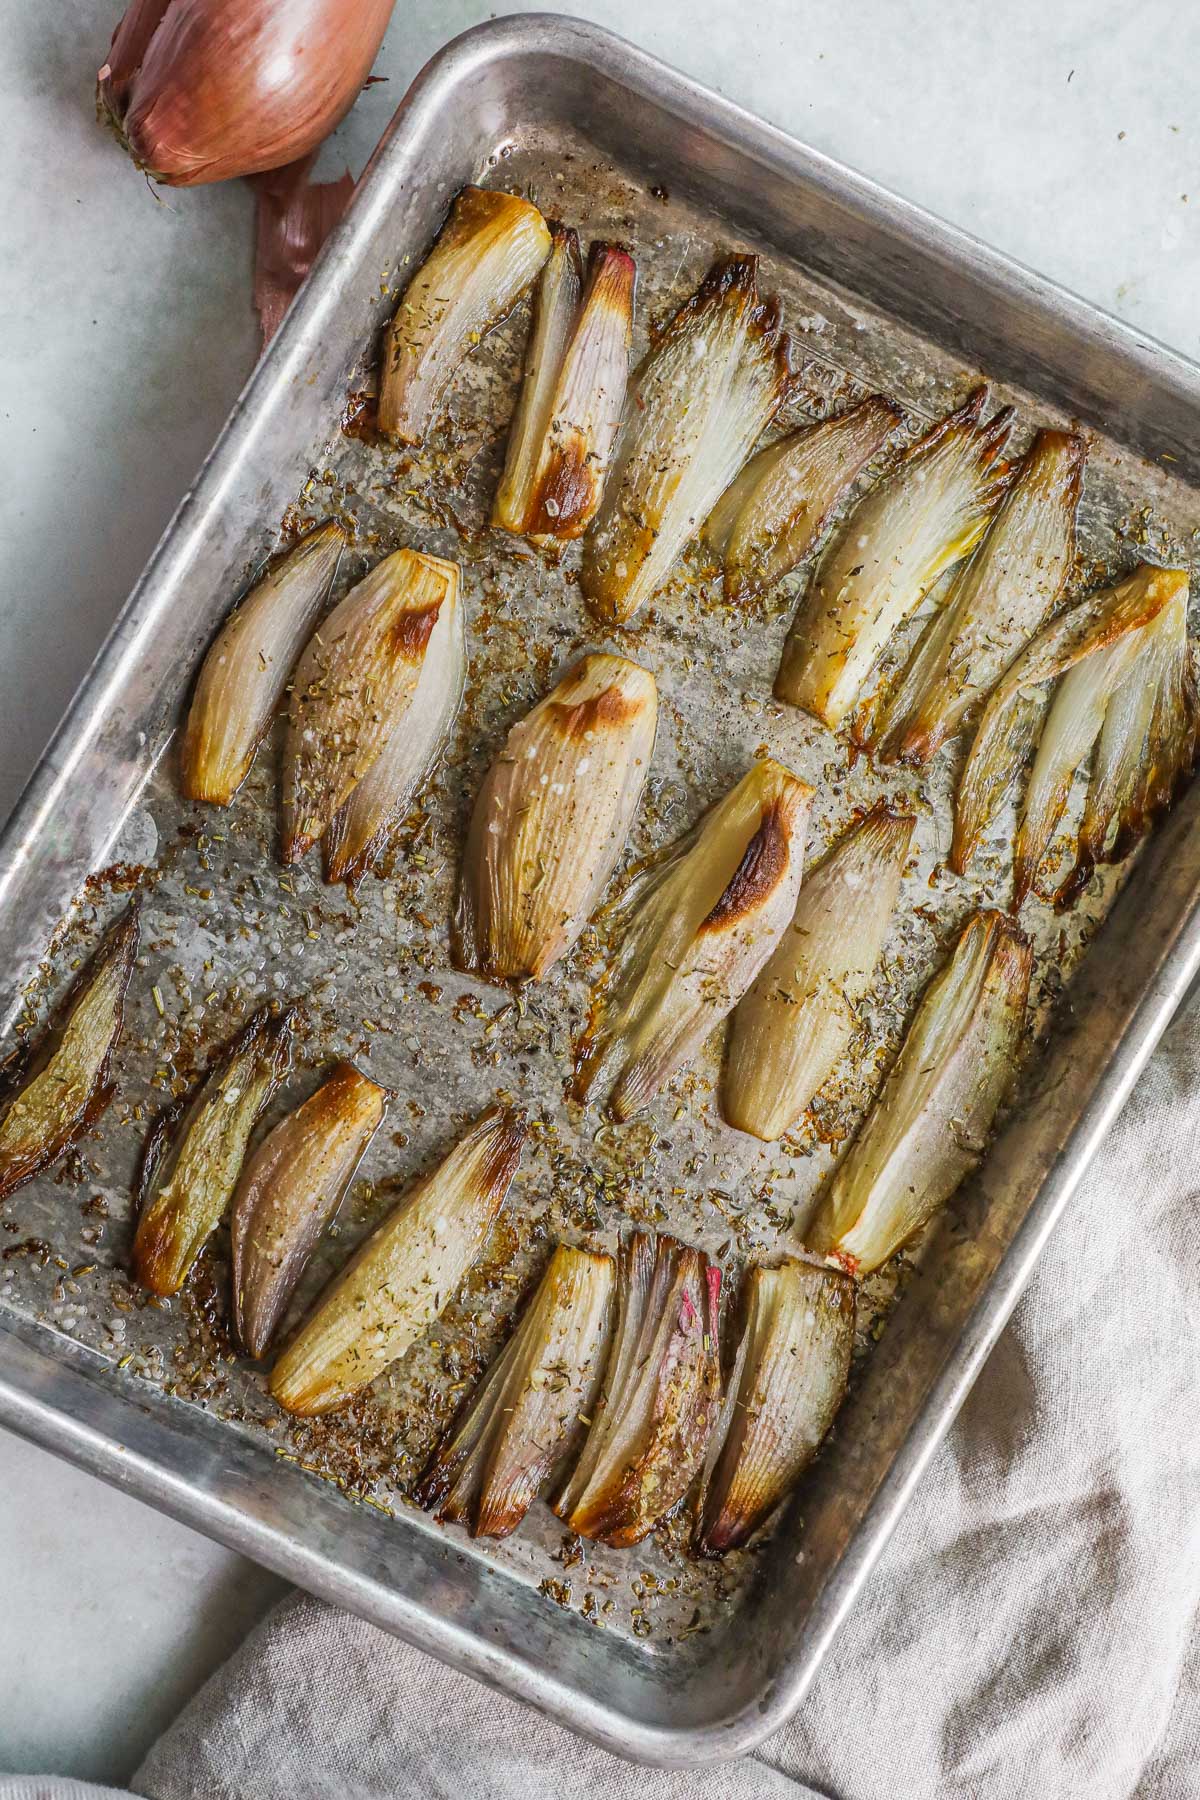 Roasted caramelized shallots on a baking sheet with dried herbs.